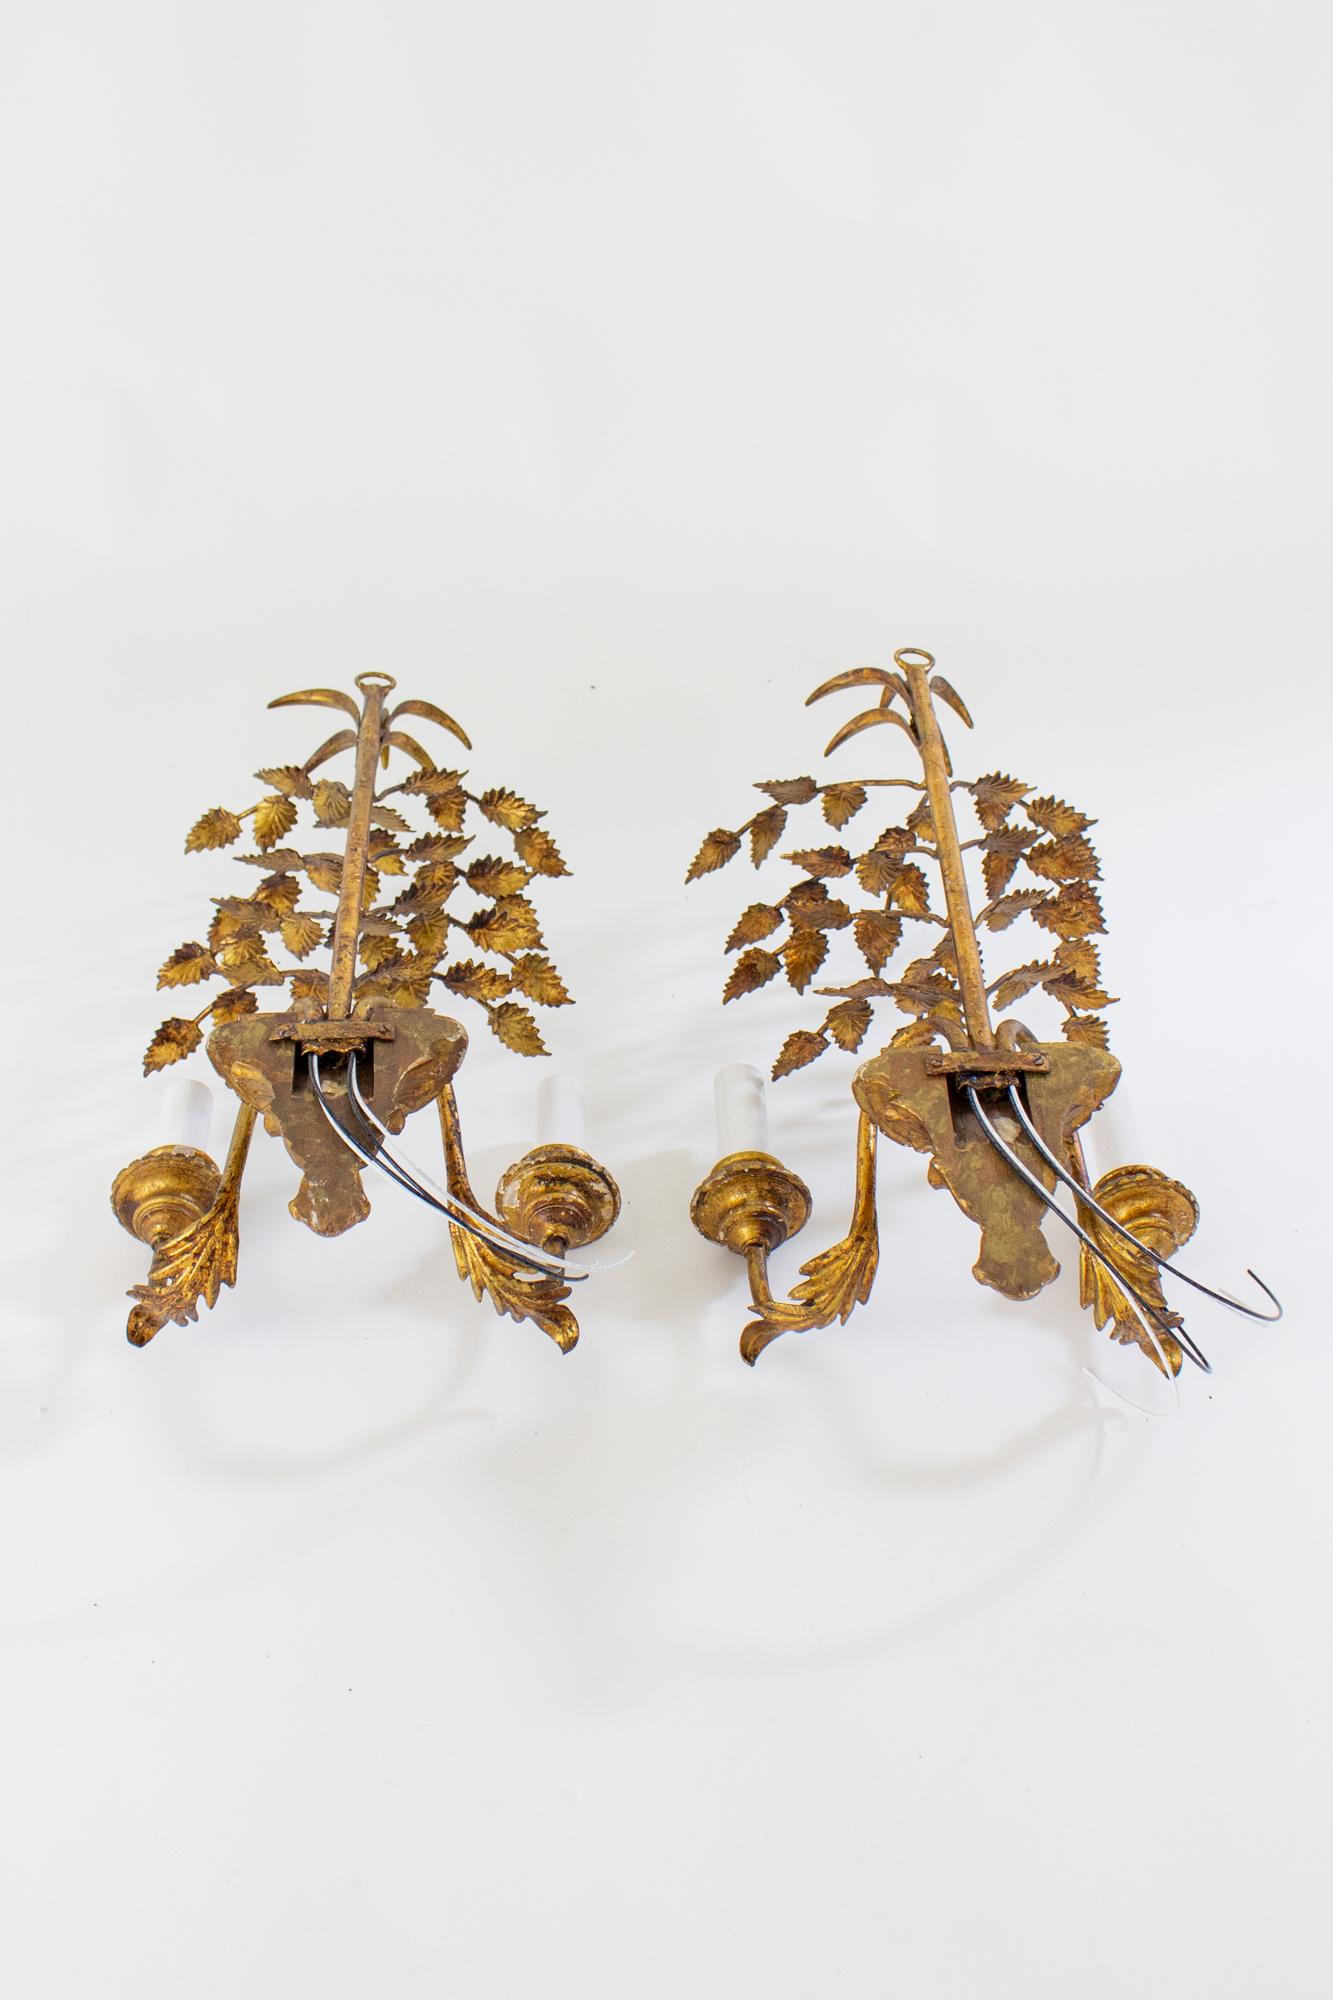 Mid 20th Century Italian Gilt Wood and Metal Leaf Sconces - a Pair For Sale 3